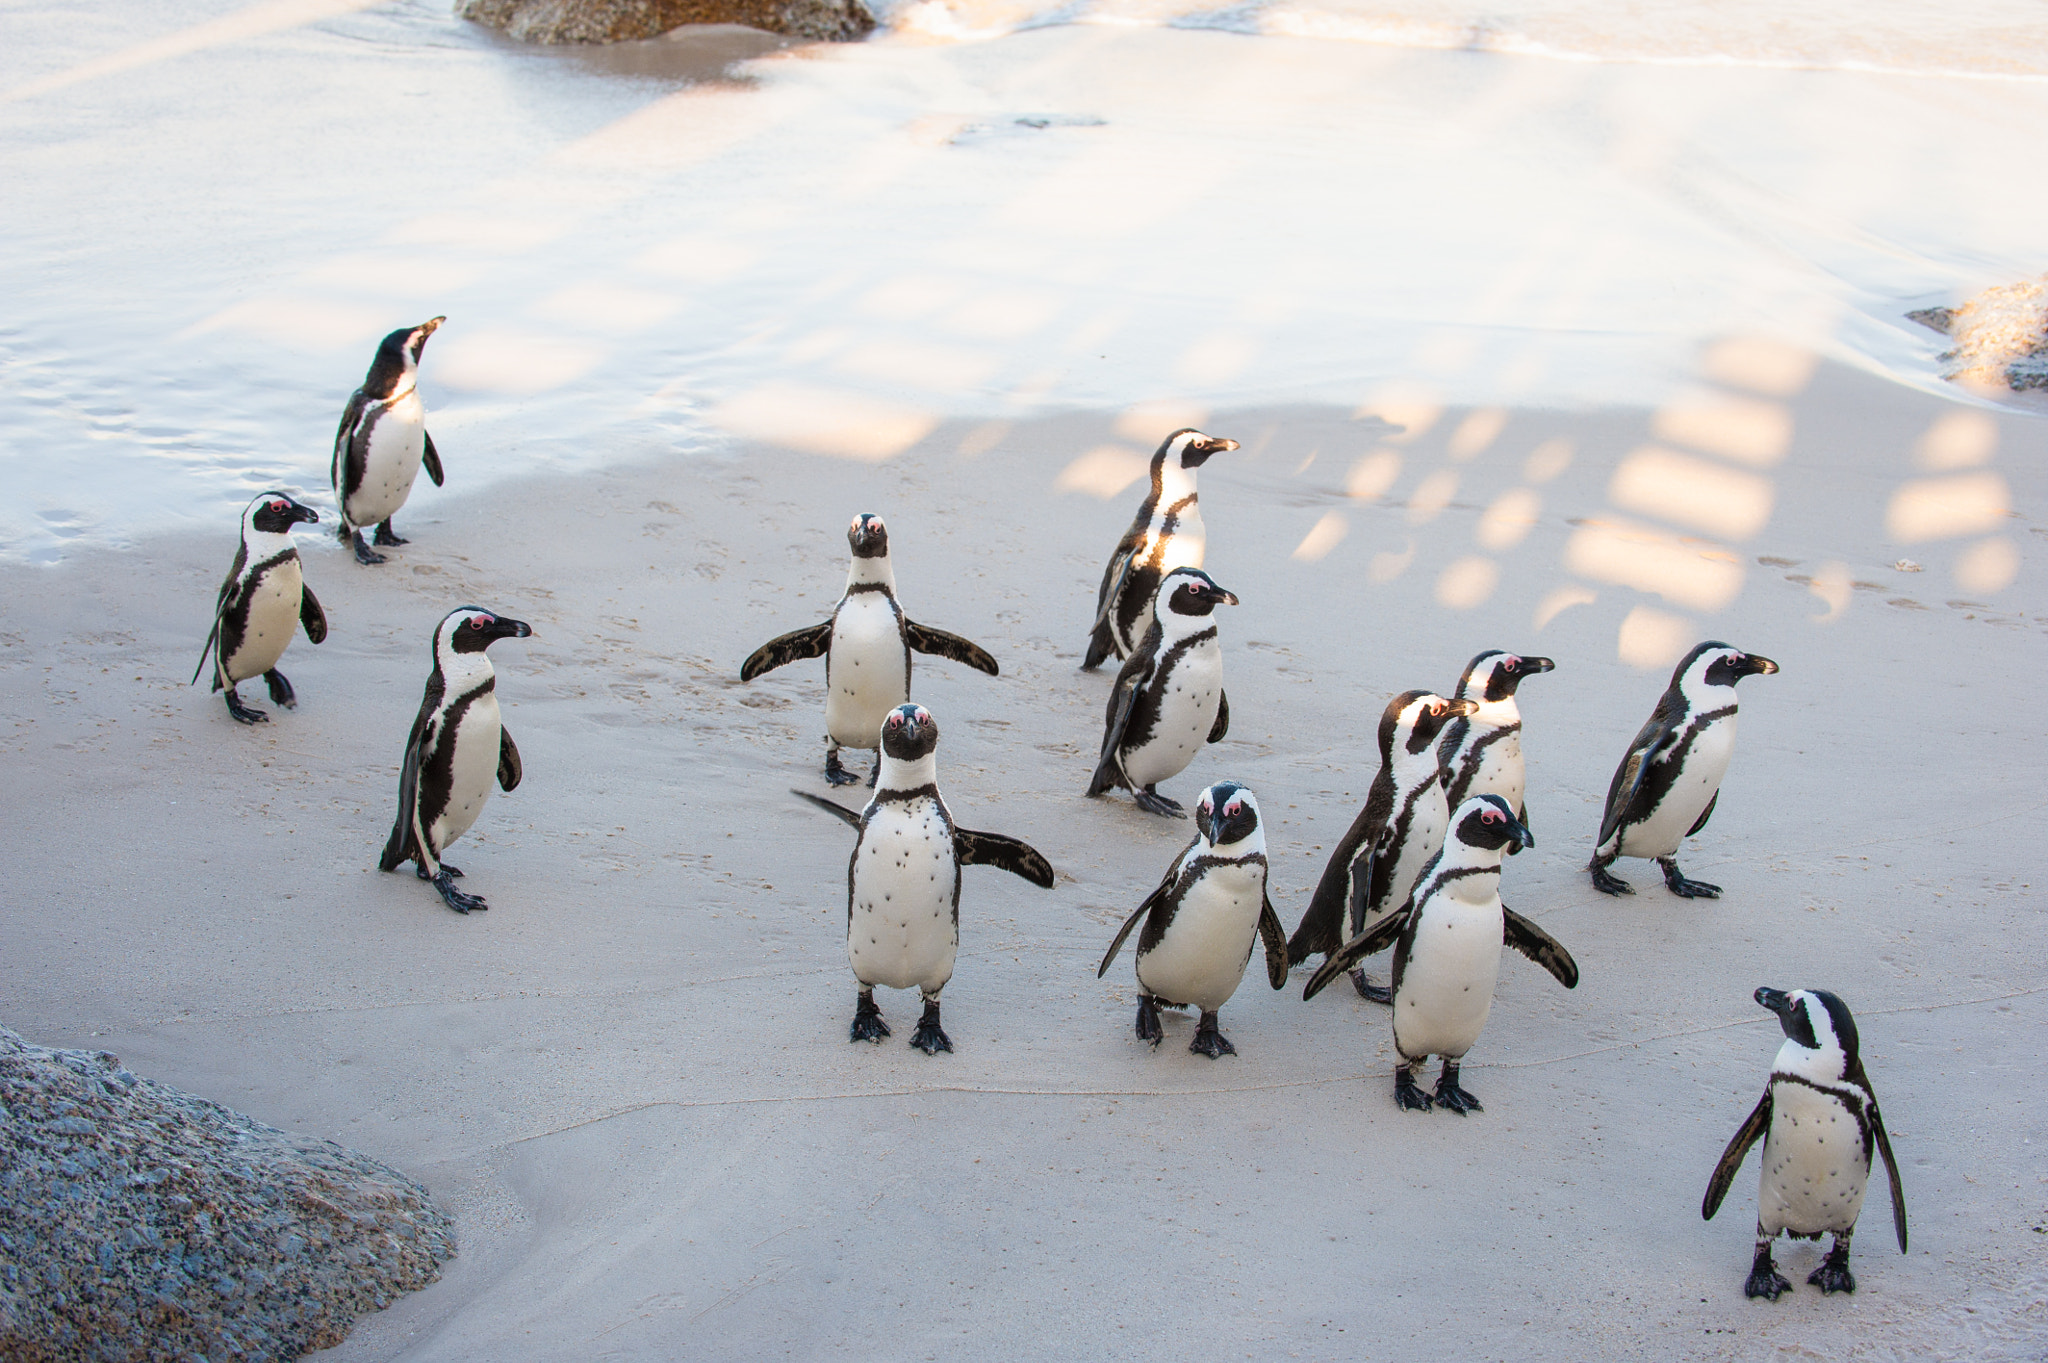 Nikon D3 sample photo. A family of penguins at the beach photography